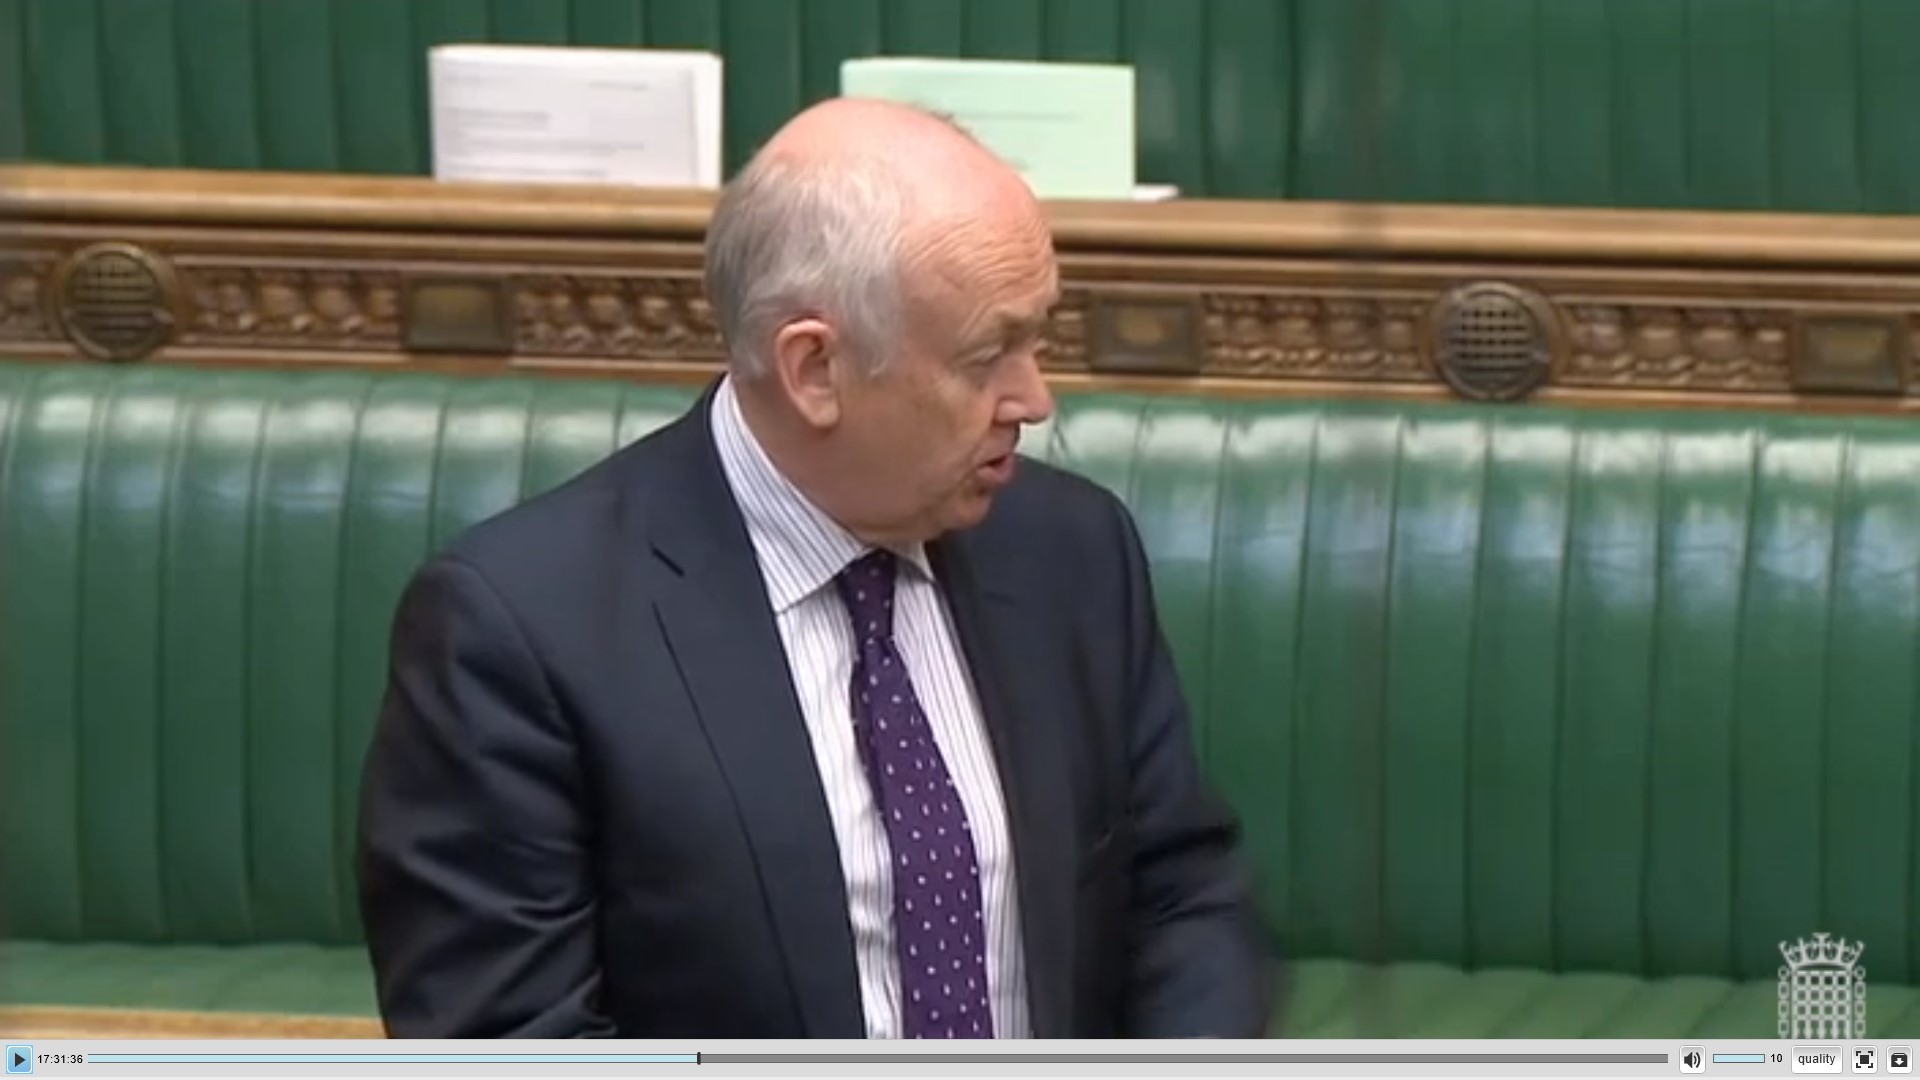 Wayne David has secured an adjournment debate in the House of Commons 